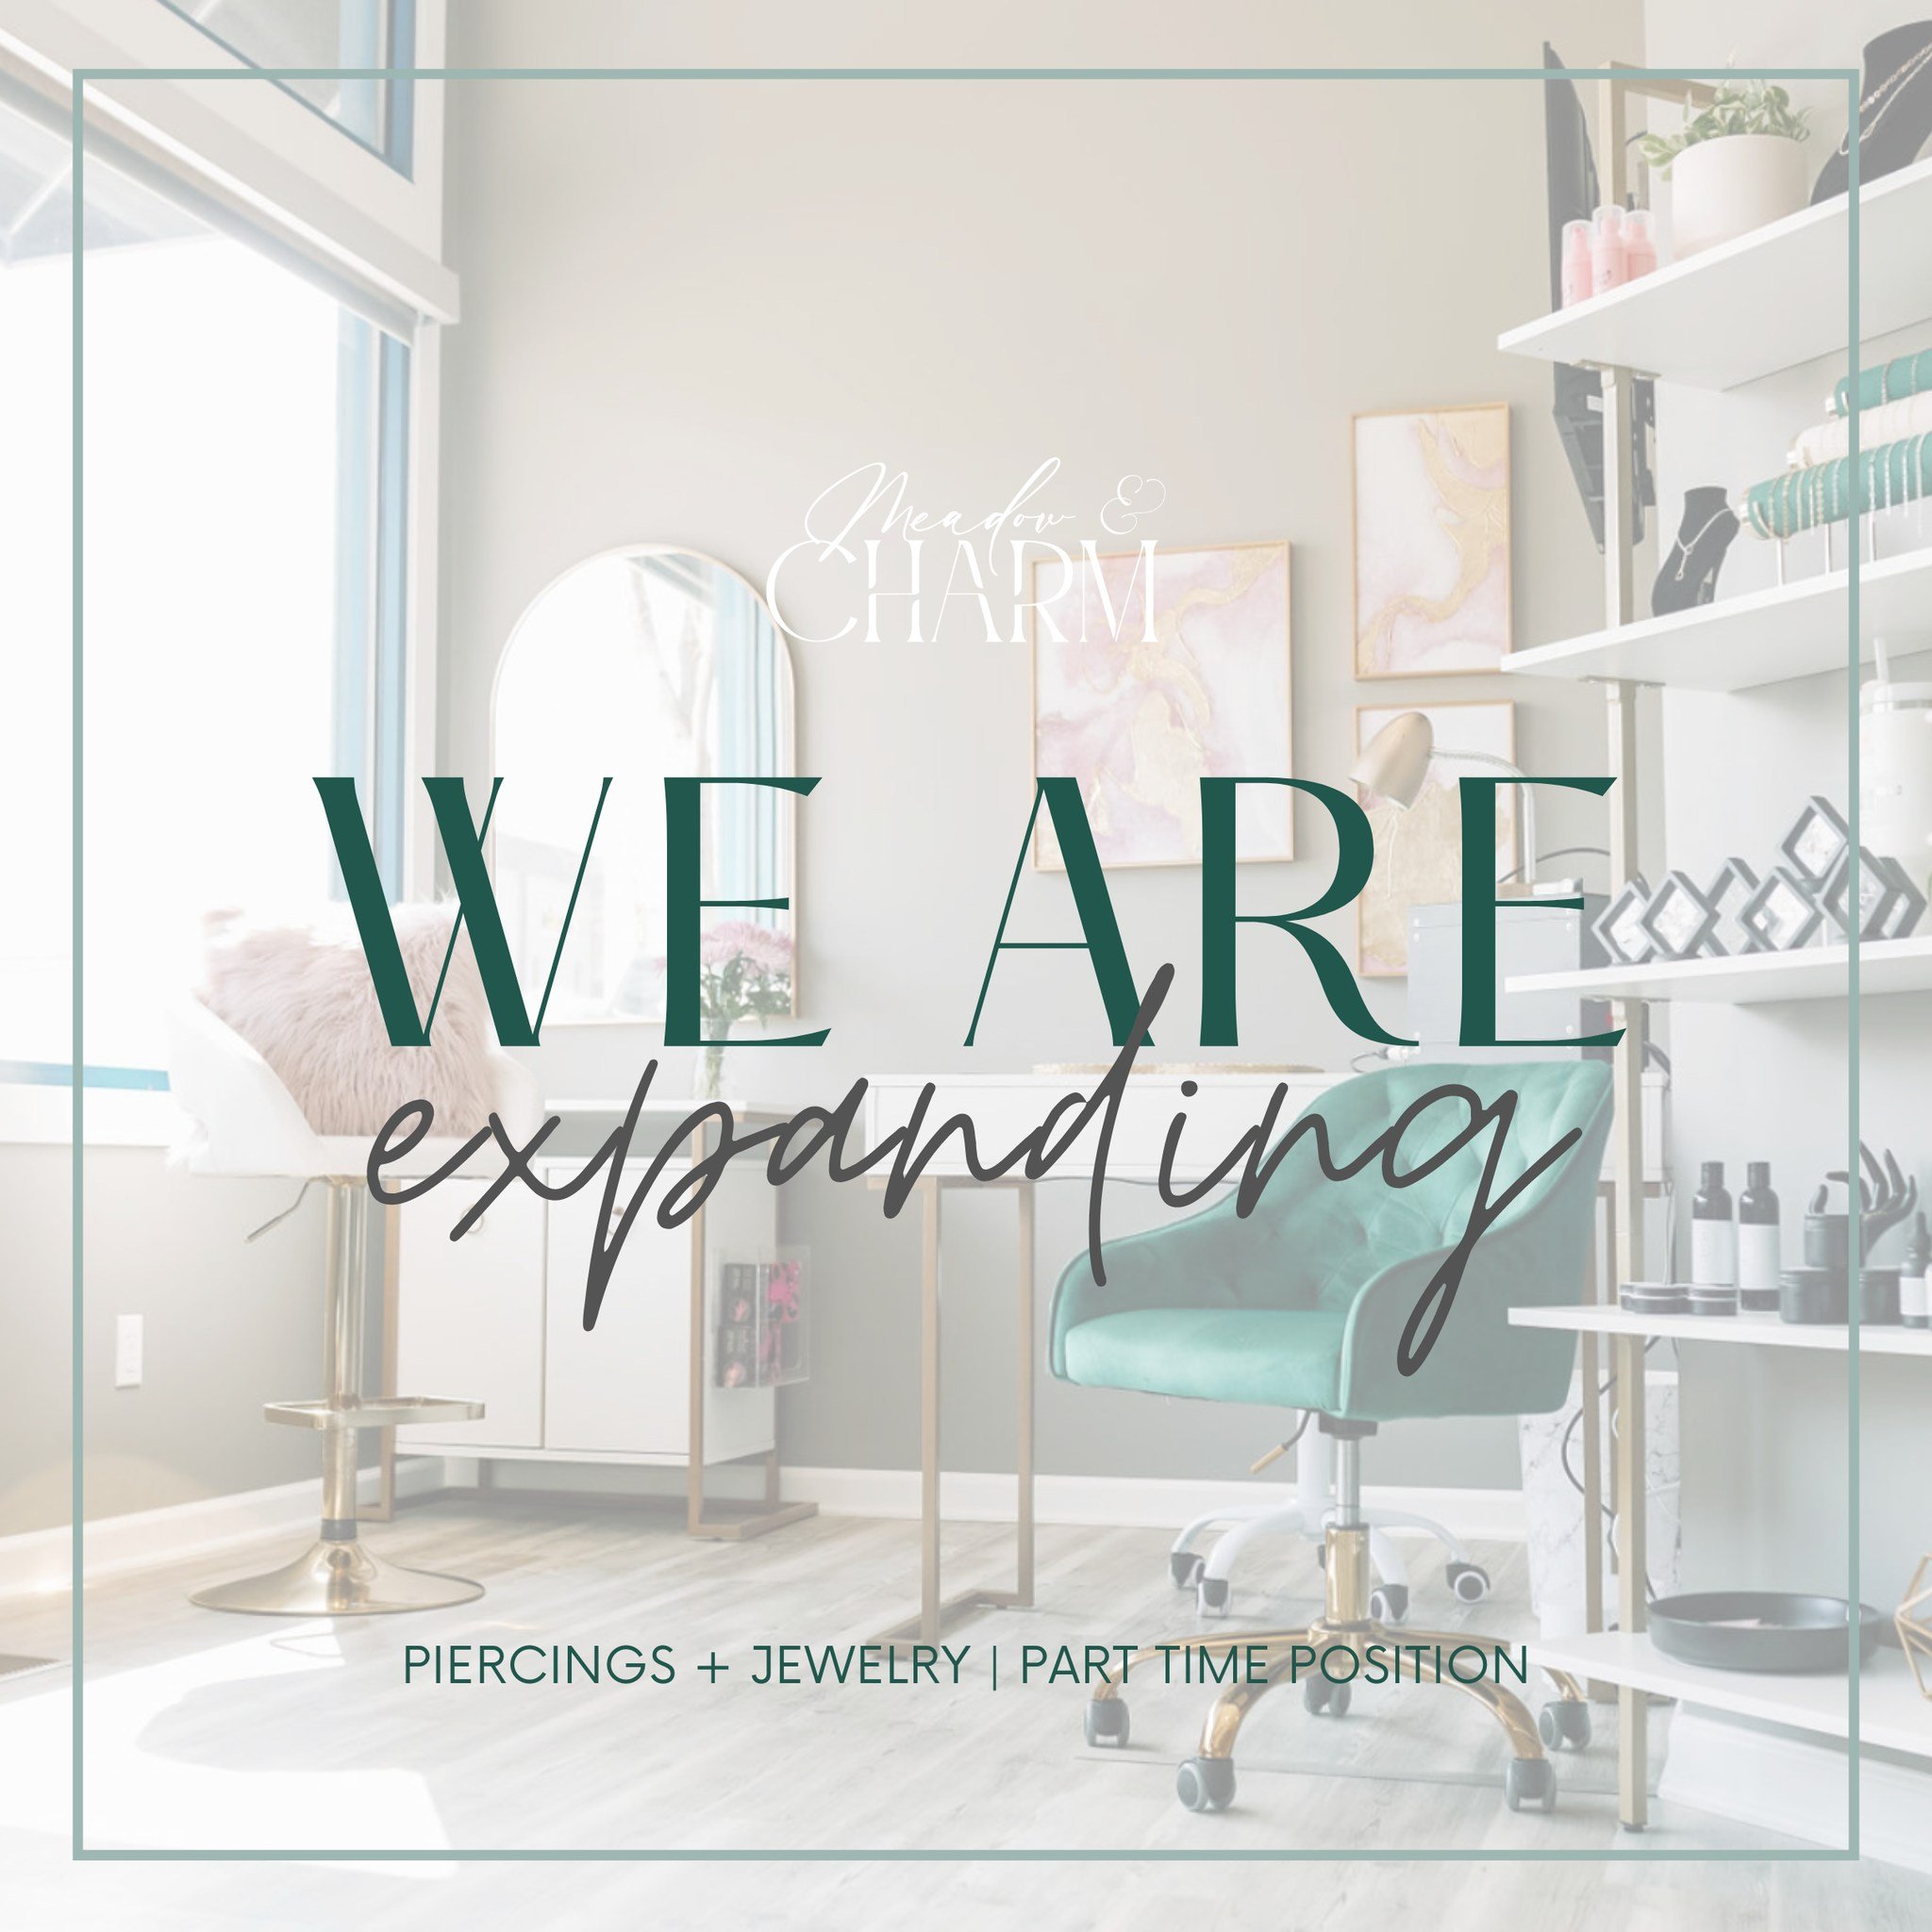 💕✨EXCITING NEWS: WE ARE EXPANDING! ✨💕

In order to expand hours at both of our gorgeous locations, we are looking for ✨TWO✨ individuals for part time work in both Council Bluffs and Avoca (1 new team member for each location). Training will be prov